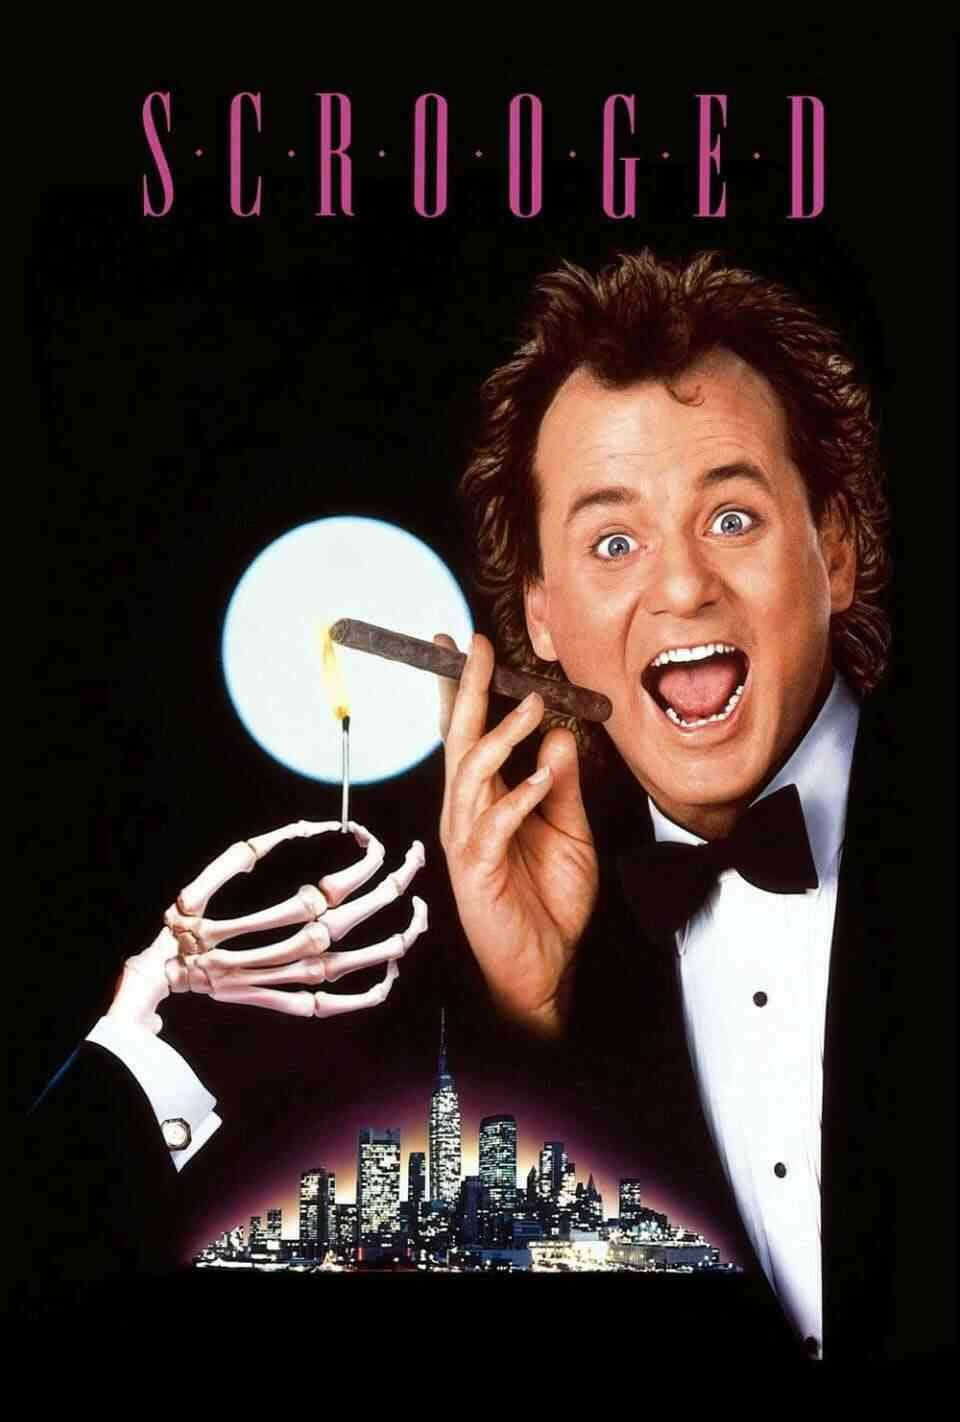 Read Scrooged screenplay (poster)